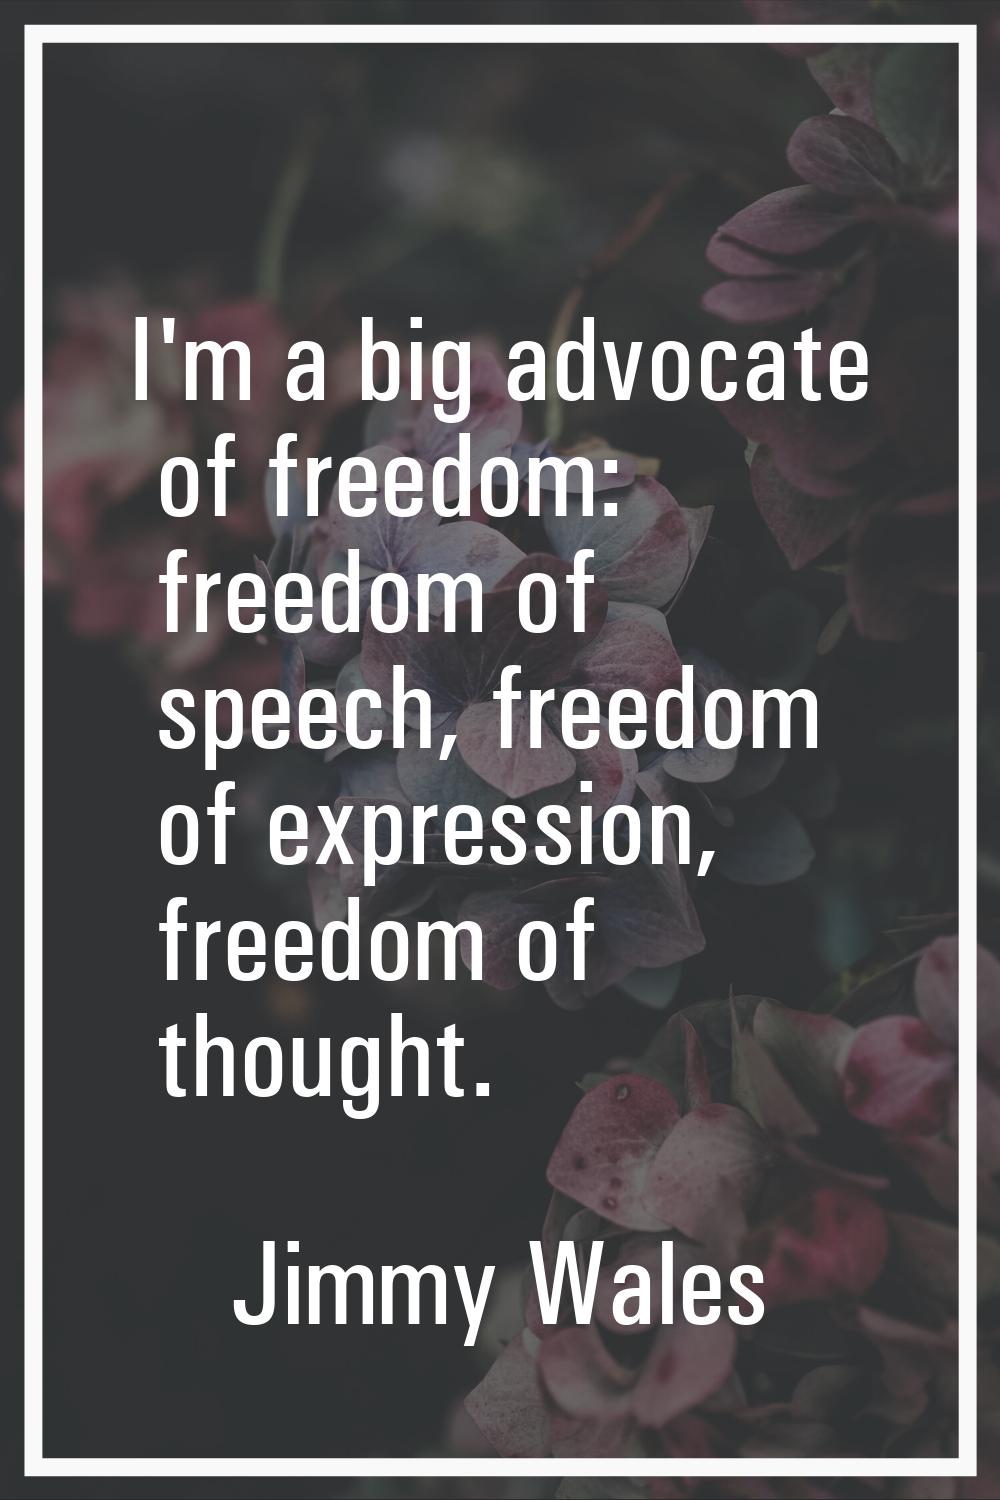 I'm a big advocate of freedom: freedom of speech, freedom of expression, freedom of thought.